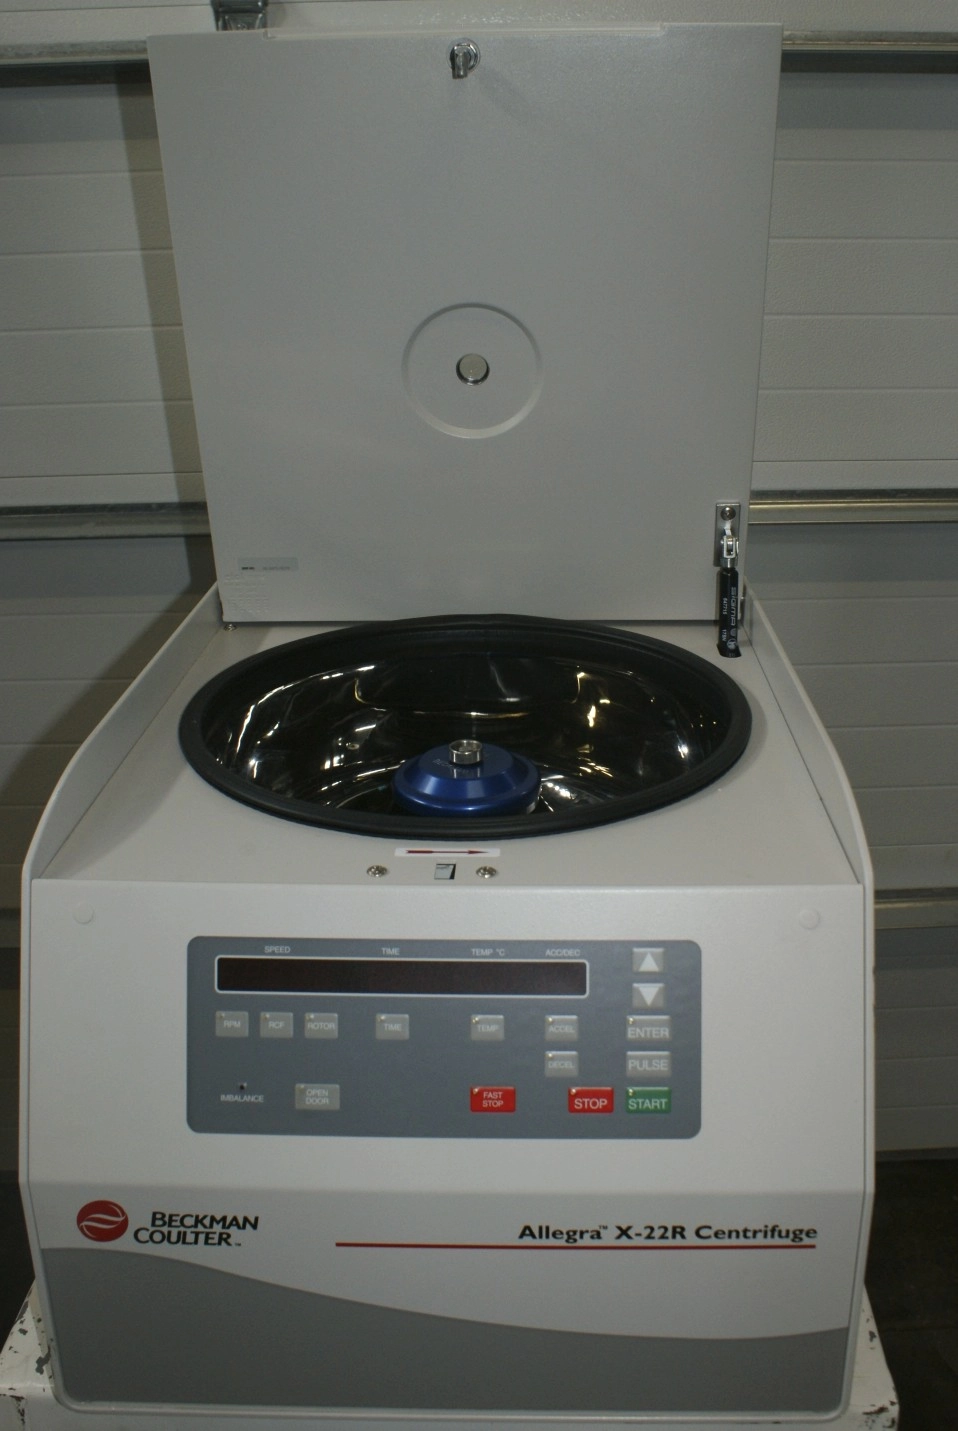 Beckman Coulter F1010 Beckman F1010 Rotor and is available with centrifuge or by itself- shown in photo- this used rotor look